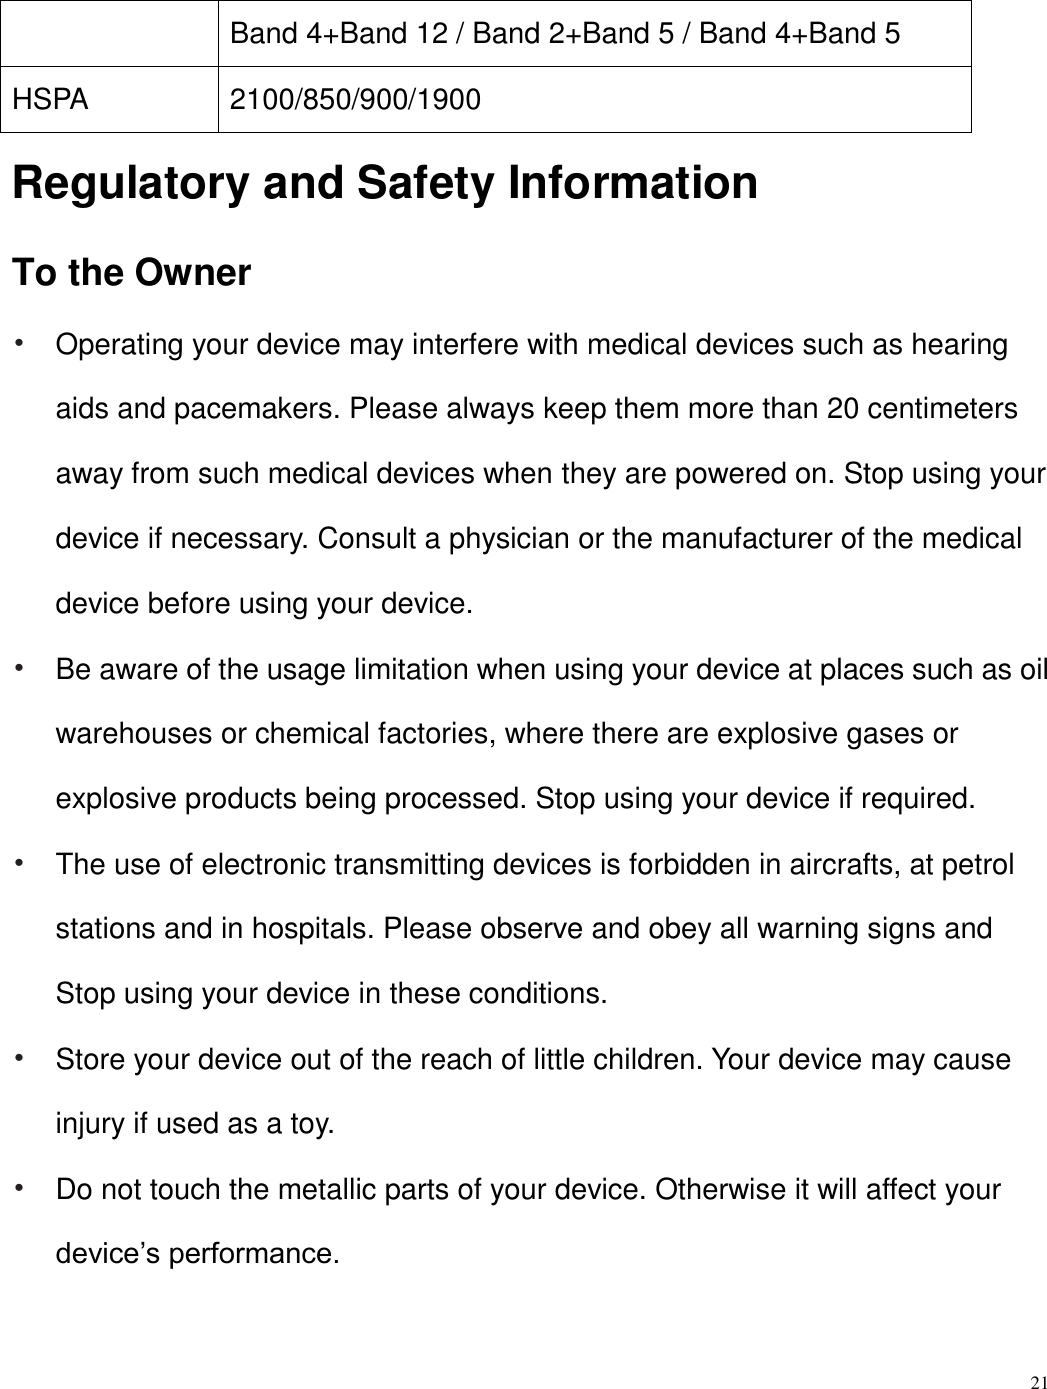 21  Band 4+Band 12 / Band 2+Band 5 / Band 4+Band 5   HSPA 2100/850/900/1900 Regulatory and Safety Information To the Owner • Operating your device may interfere with medical devices such as hearing aids and pacemakers. Please always keep them more than 20 centimeters away from such medical devices when they are powered on. Stop using your device if necessary. Consult a physician or the manufacturer of the medical device before using your device. • Be aware of the usage limitation when using your device at places such as oil warehouses or chemical factories, where there are explosive gases or explosive products being processed. Stop using your device if required. • The use of electronic transmitting devices is forbidden in aircrafts, at petrol stations and in hospitals. Please observe and obey all warning signs and Stop using your device in these conditions. • Store your device out of the reach of little children. Your device may cause injury if used as a toy. • Do not touch the metallic parts of your device. Otherwise it will affect your device’s performance.   